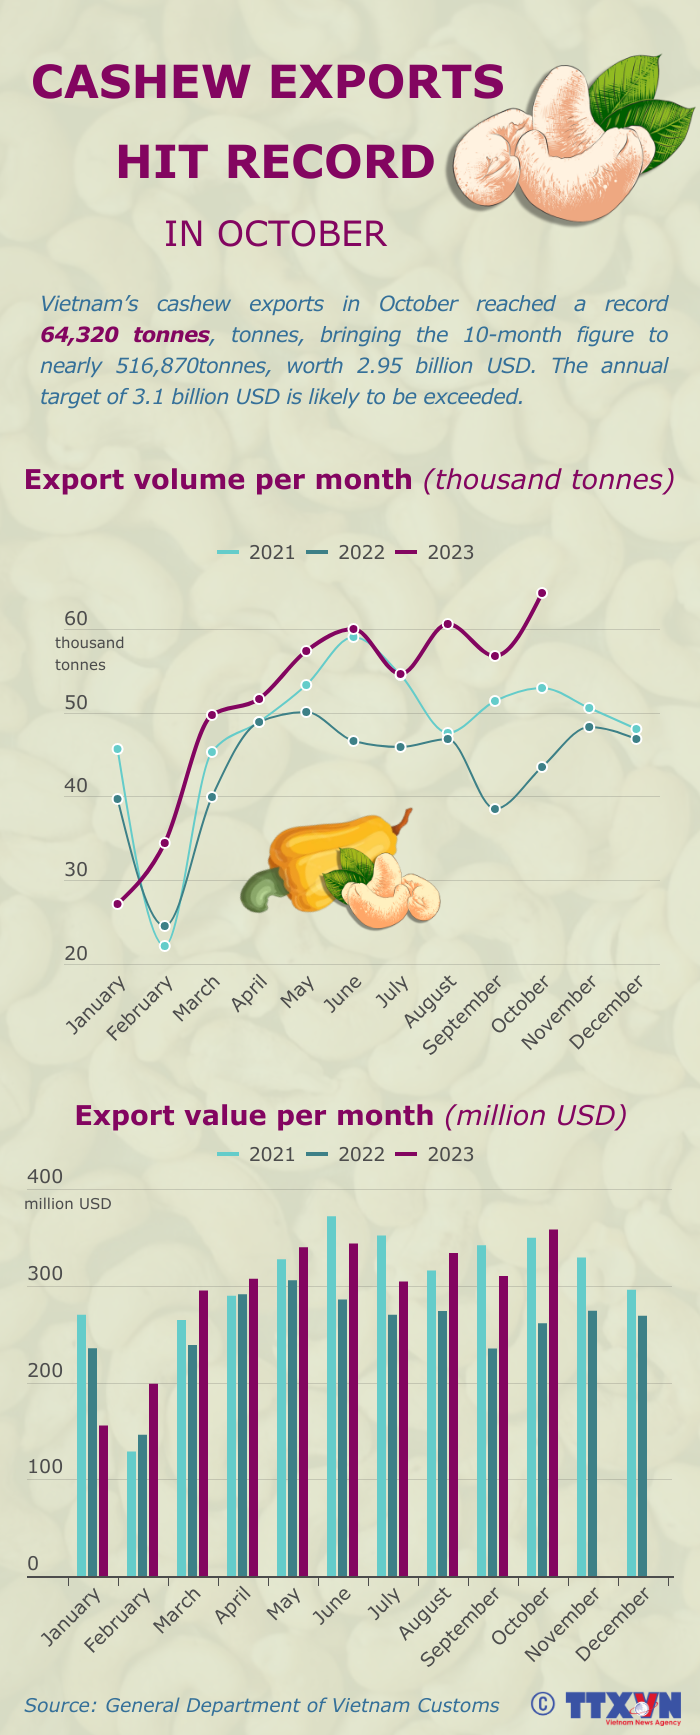 Cashew exports hit record high in October